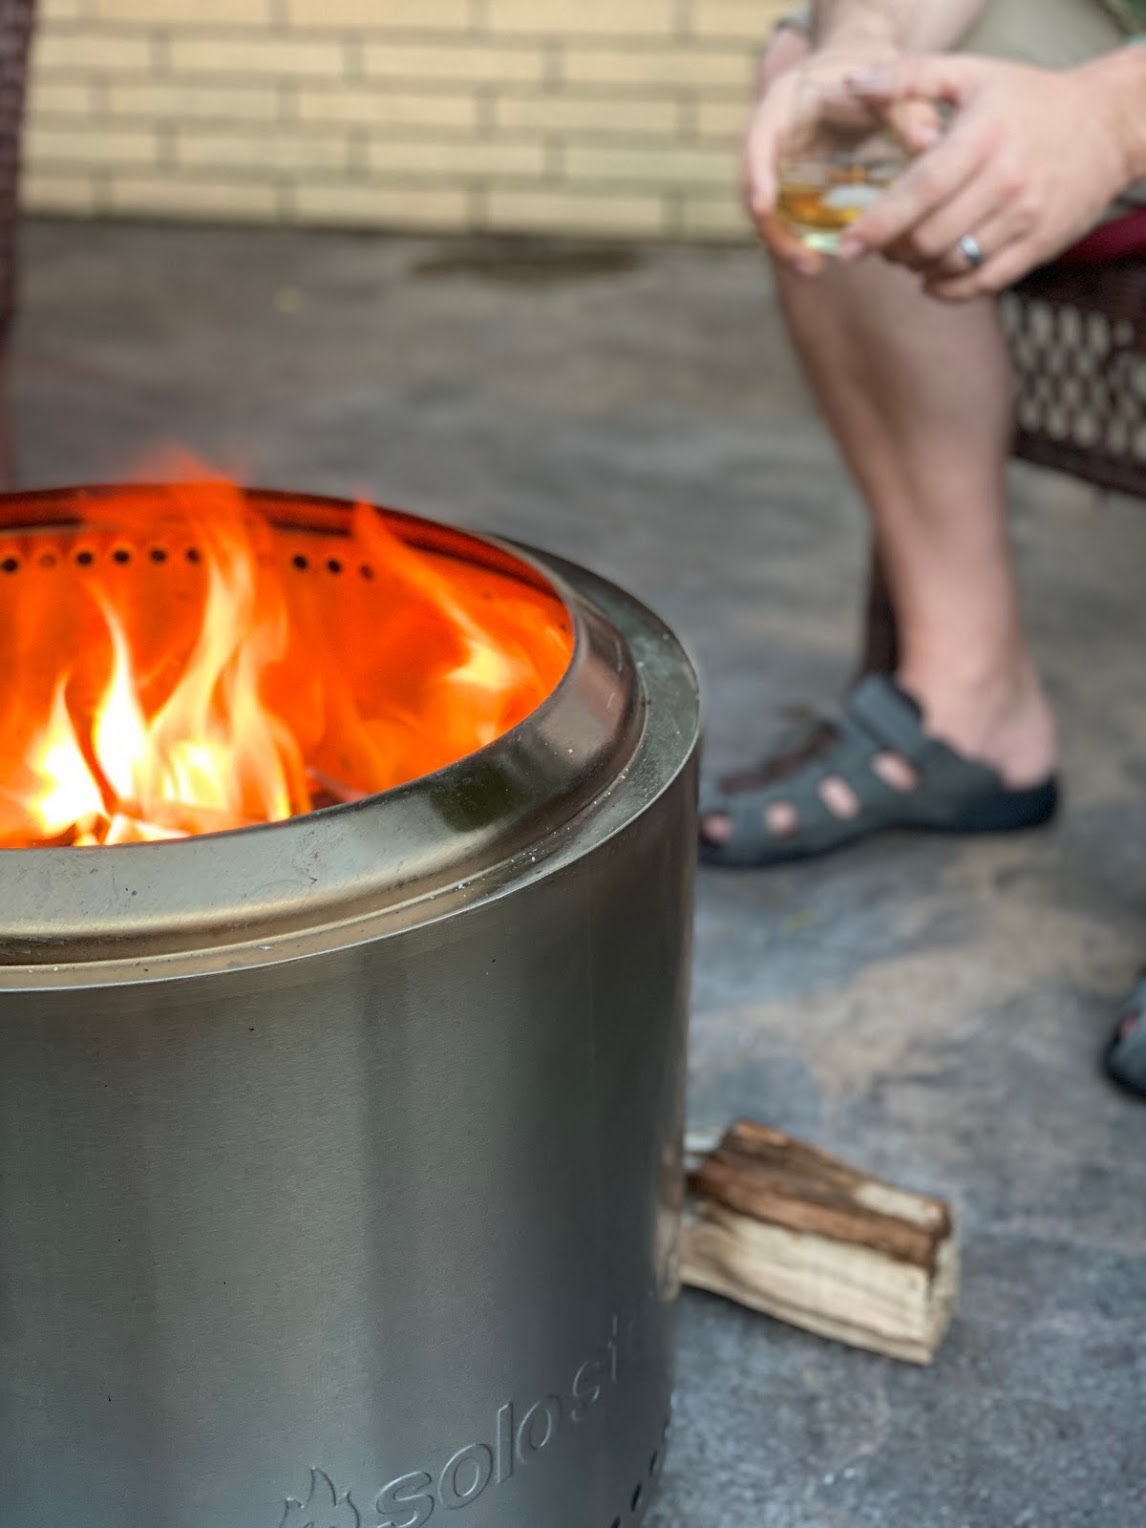 Save $10 on Solo Stove with Coupon Code